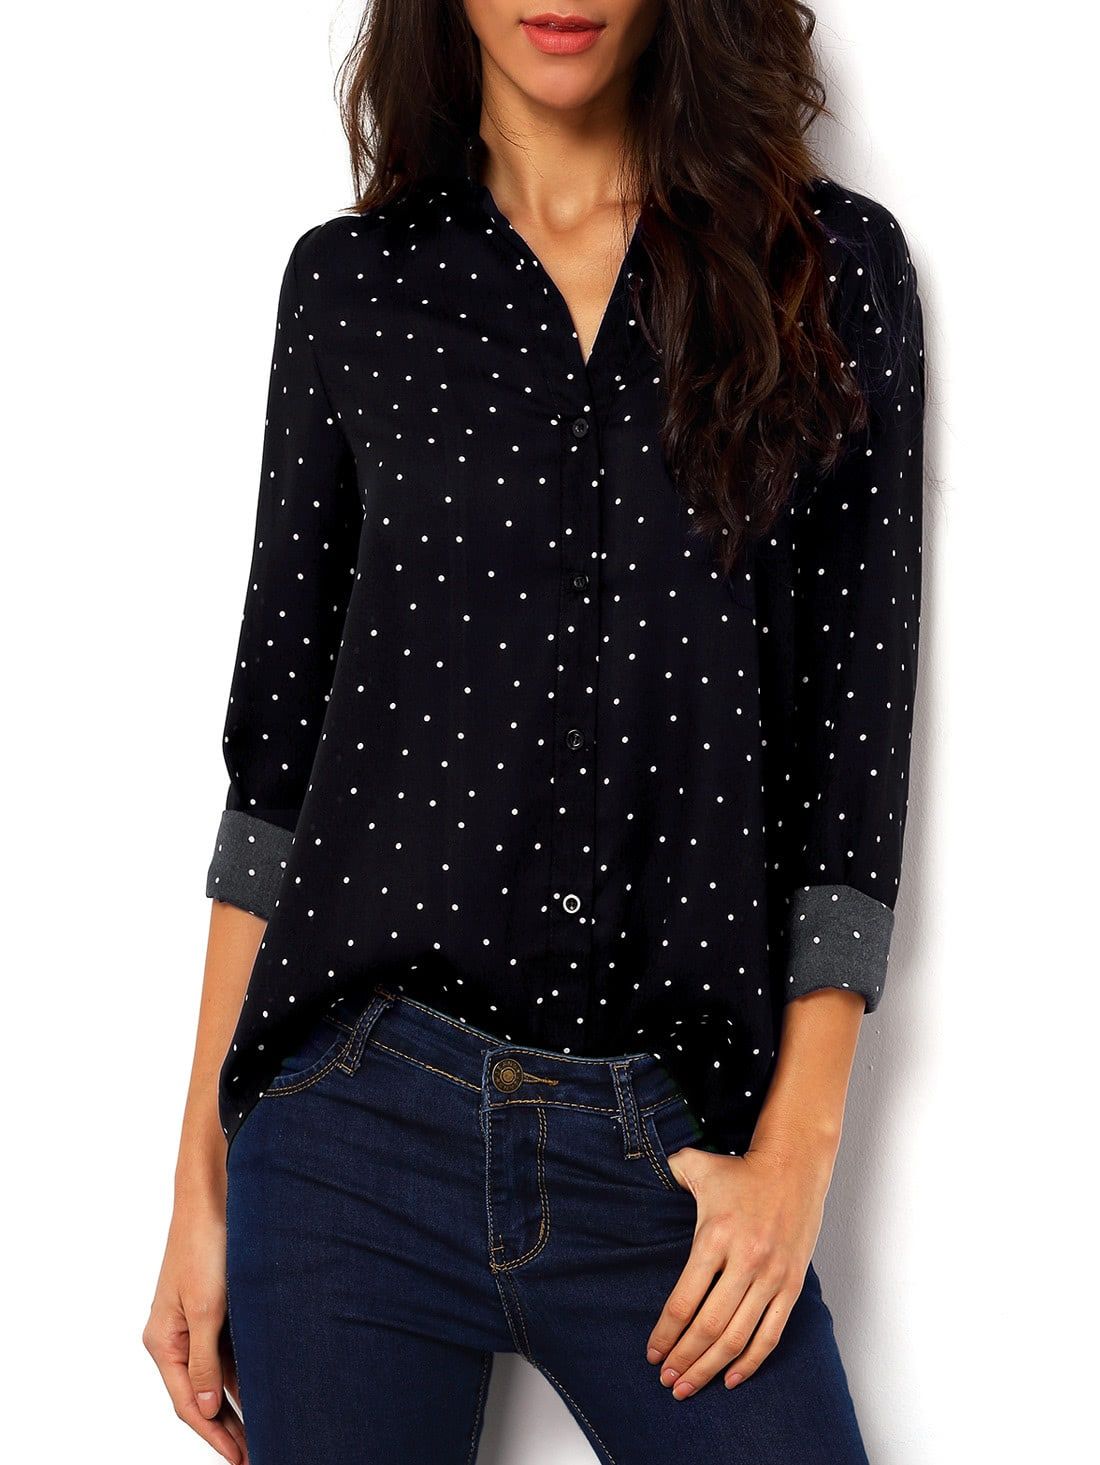 Black Polka Dot Spotted With Buttons Polkadots Blouse | SHEIN